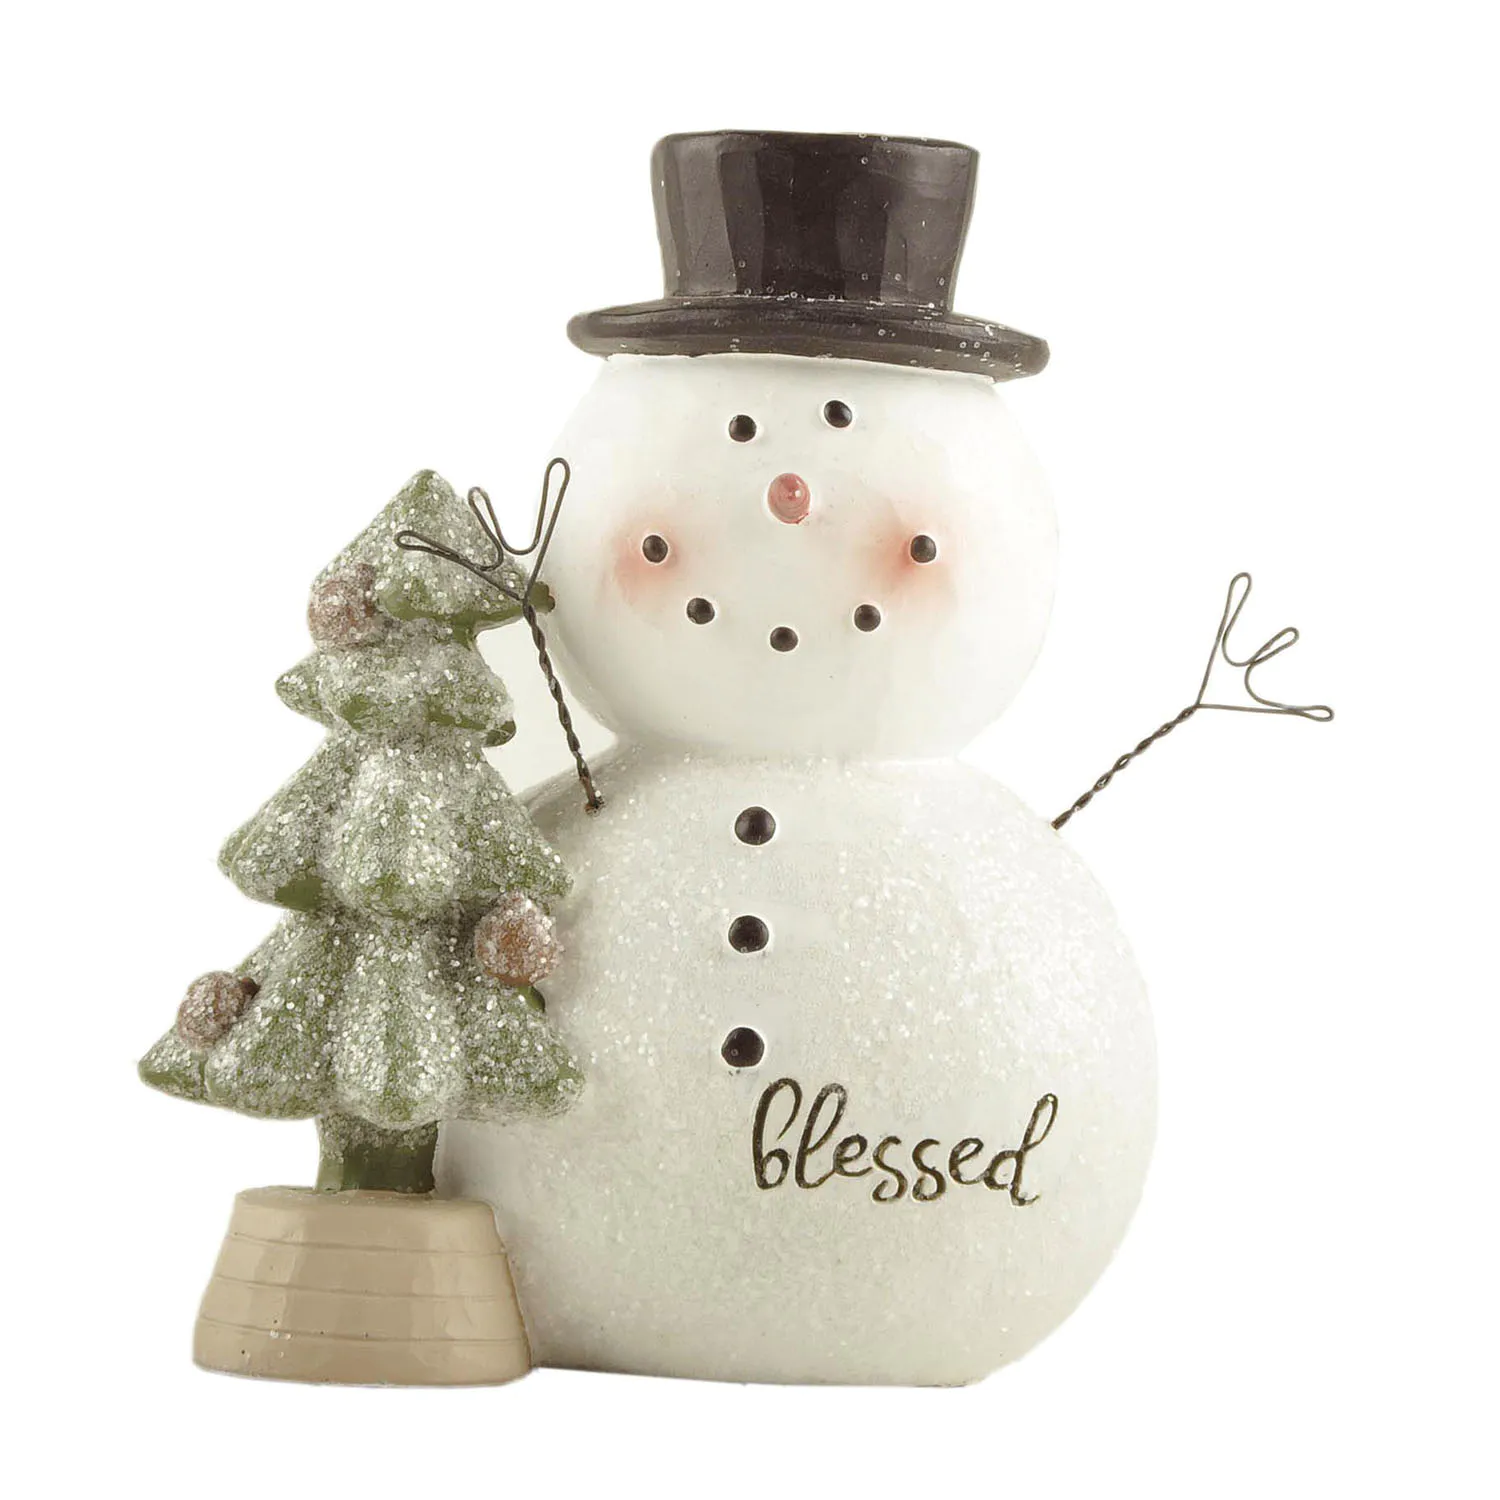 Enchanted Winter Bliss Handcrafted Resin Snowman Clutching a Glittery Tree with 'Blessed' Inscription for Home Decor 238-13930